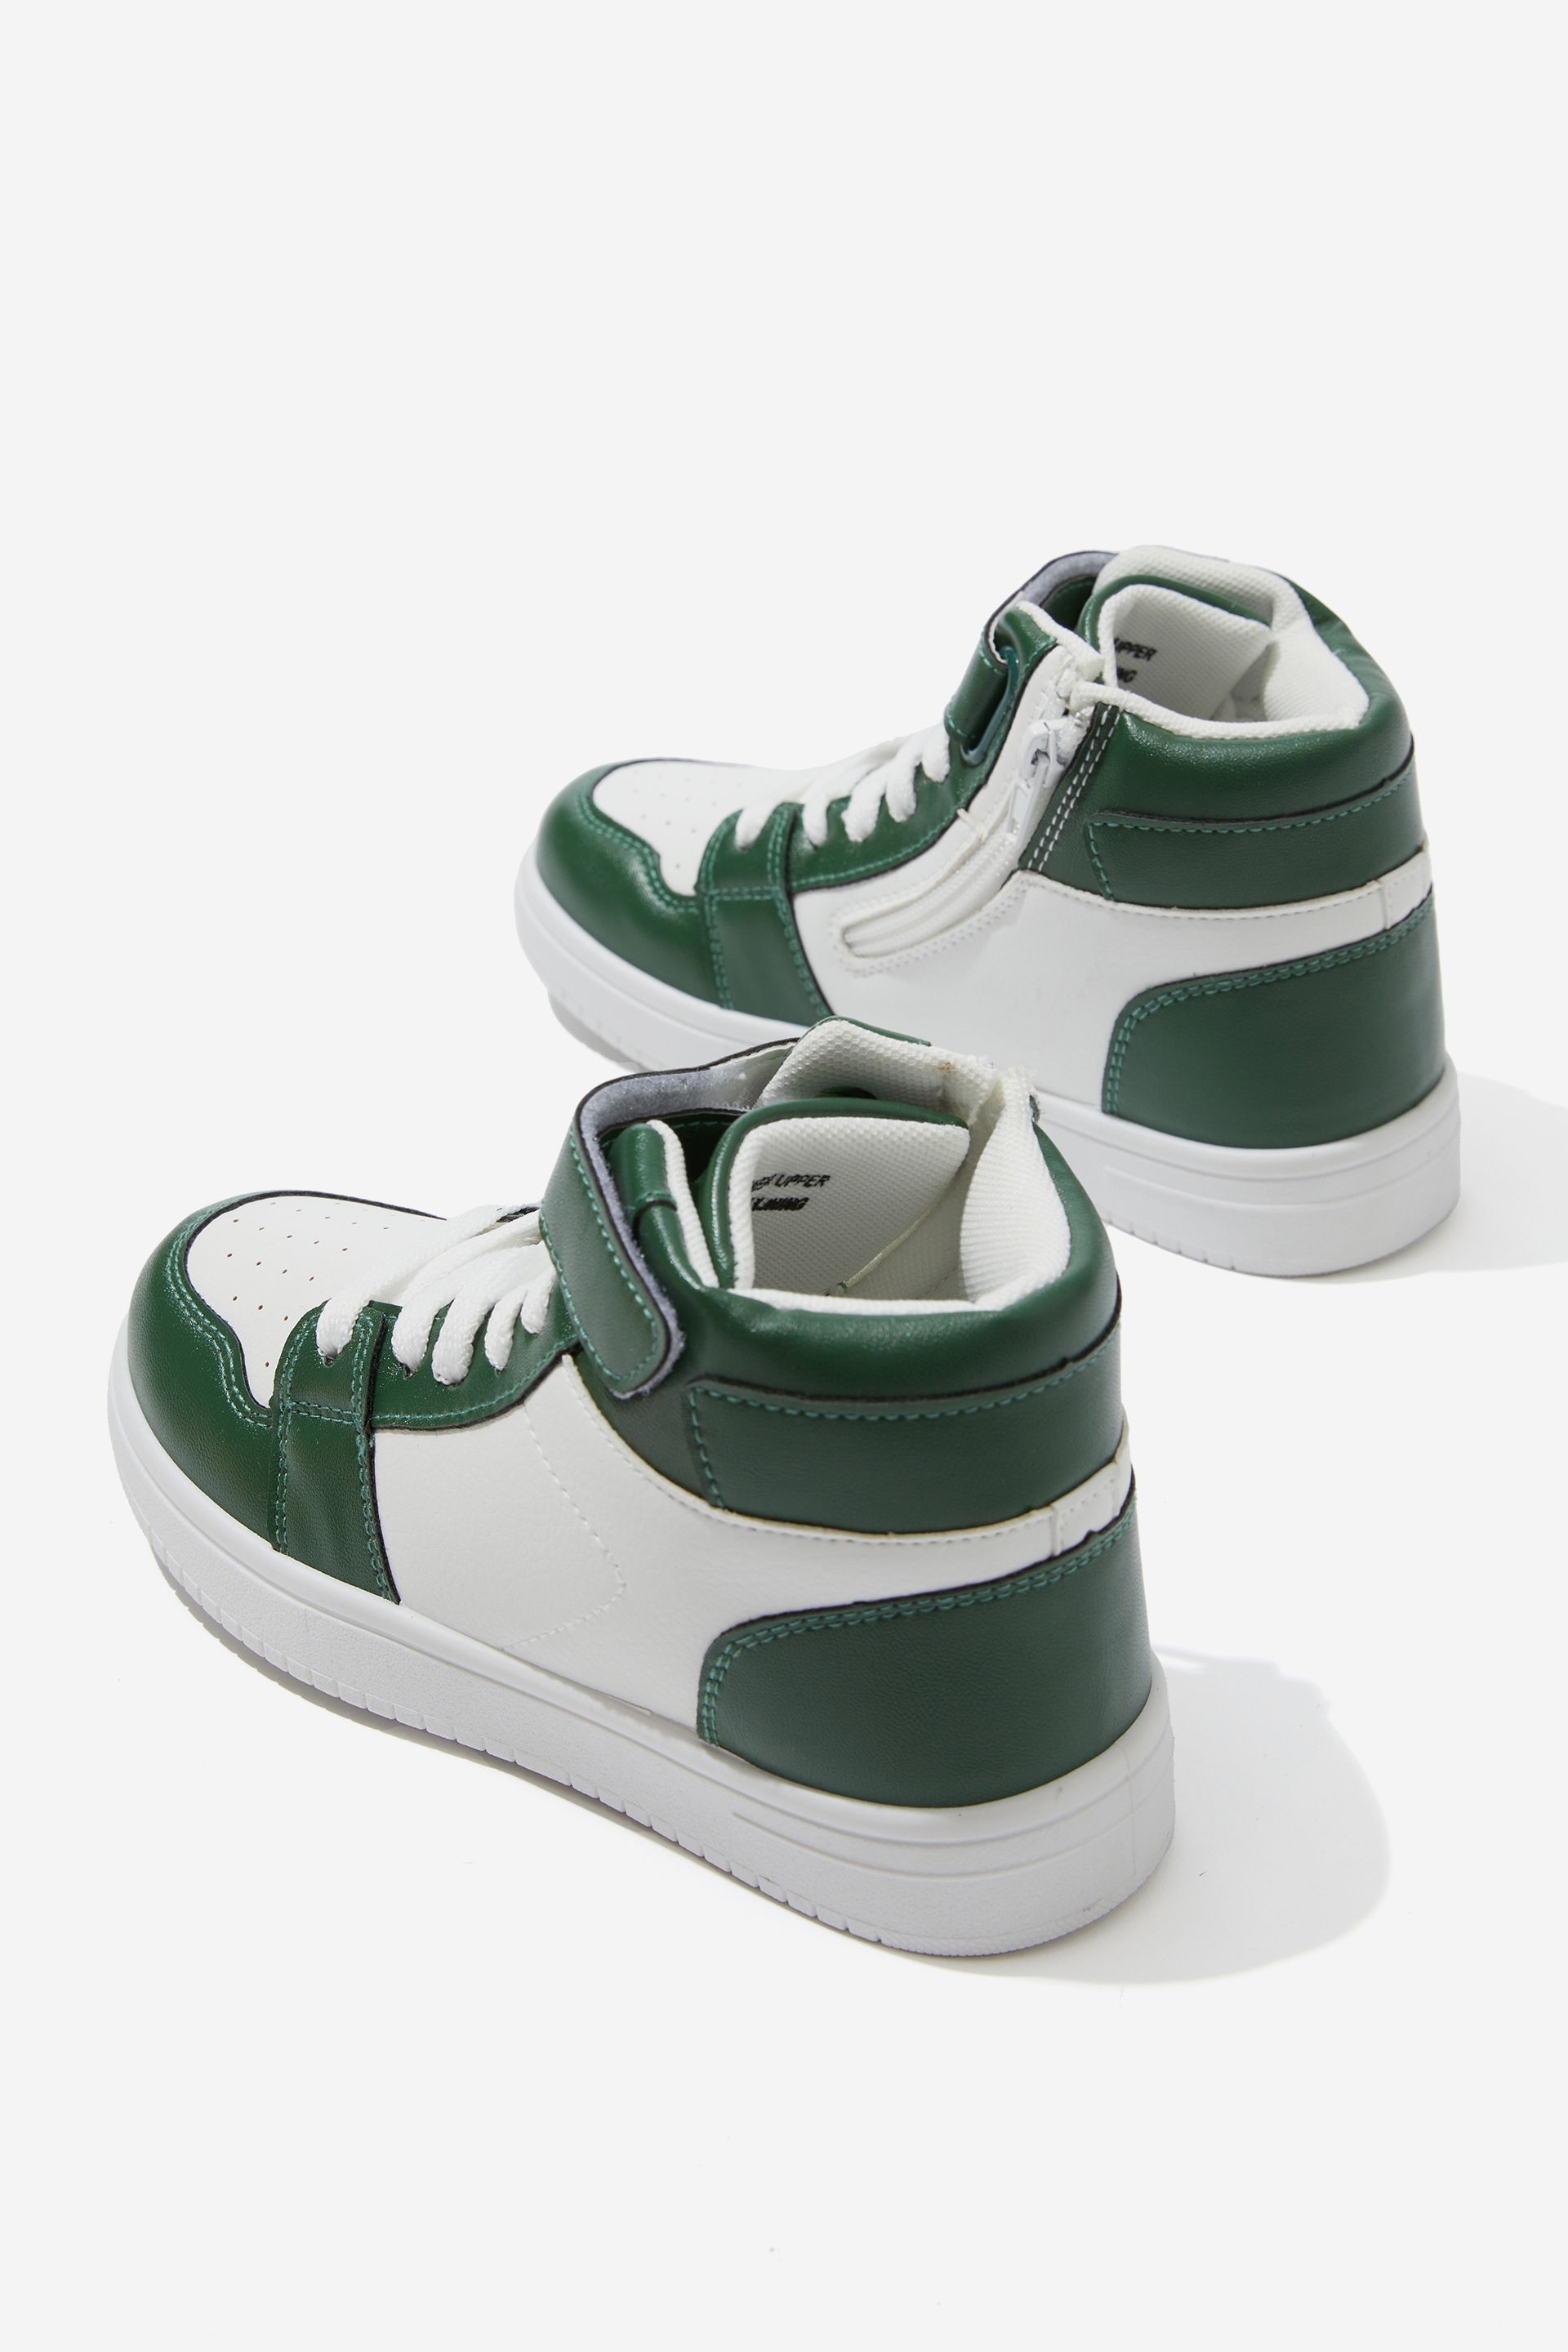 Cotton on Kids - Hunter High Top Trainer - Turtle Green/White